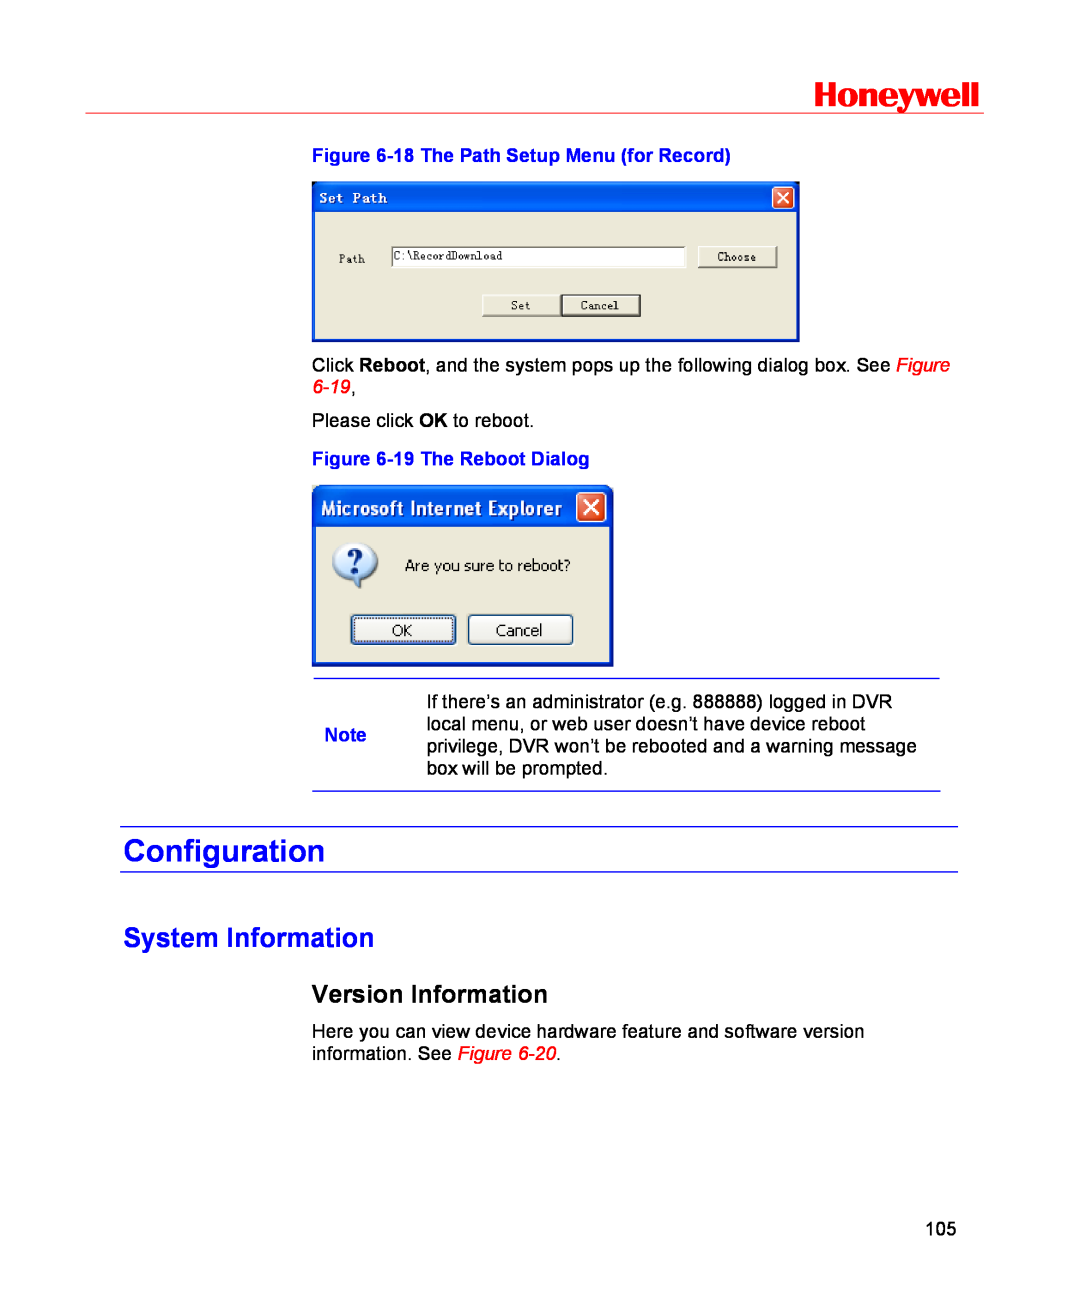 Honeywell HSVR-16 Configuration, System Information, Version Information, Honeywell, 18 The Path Setup Menu for Record 